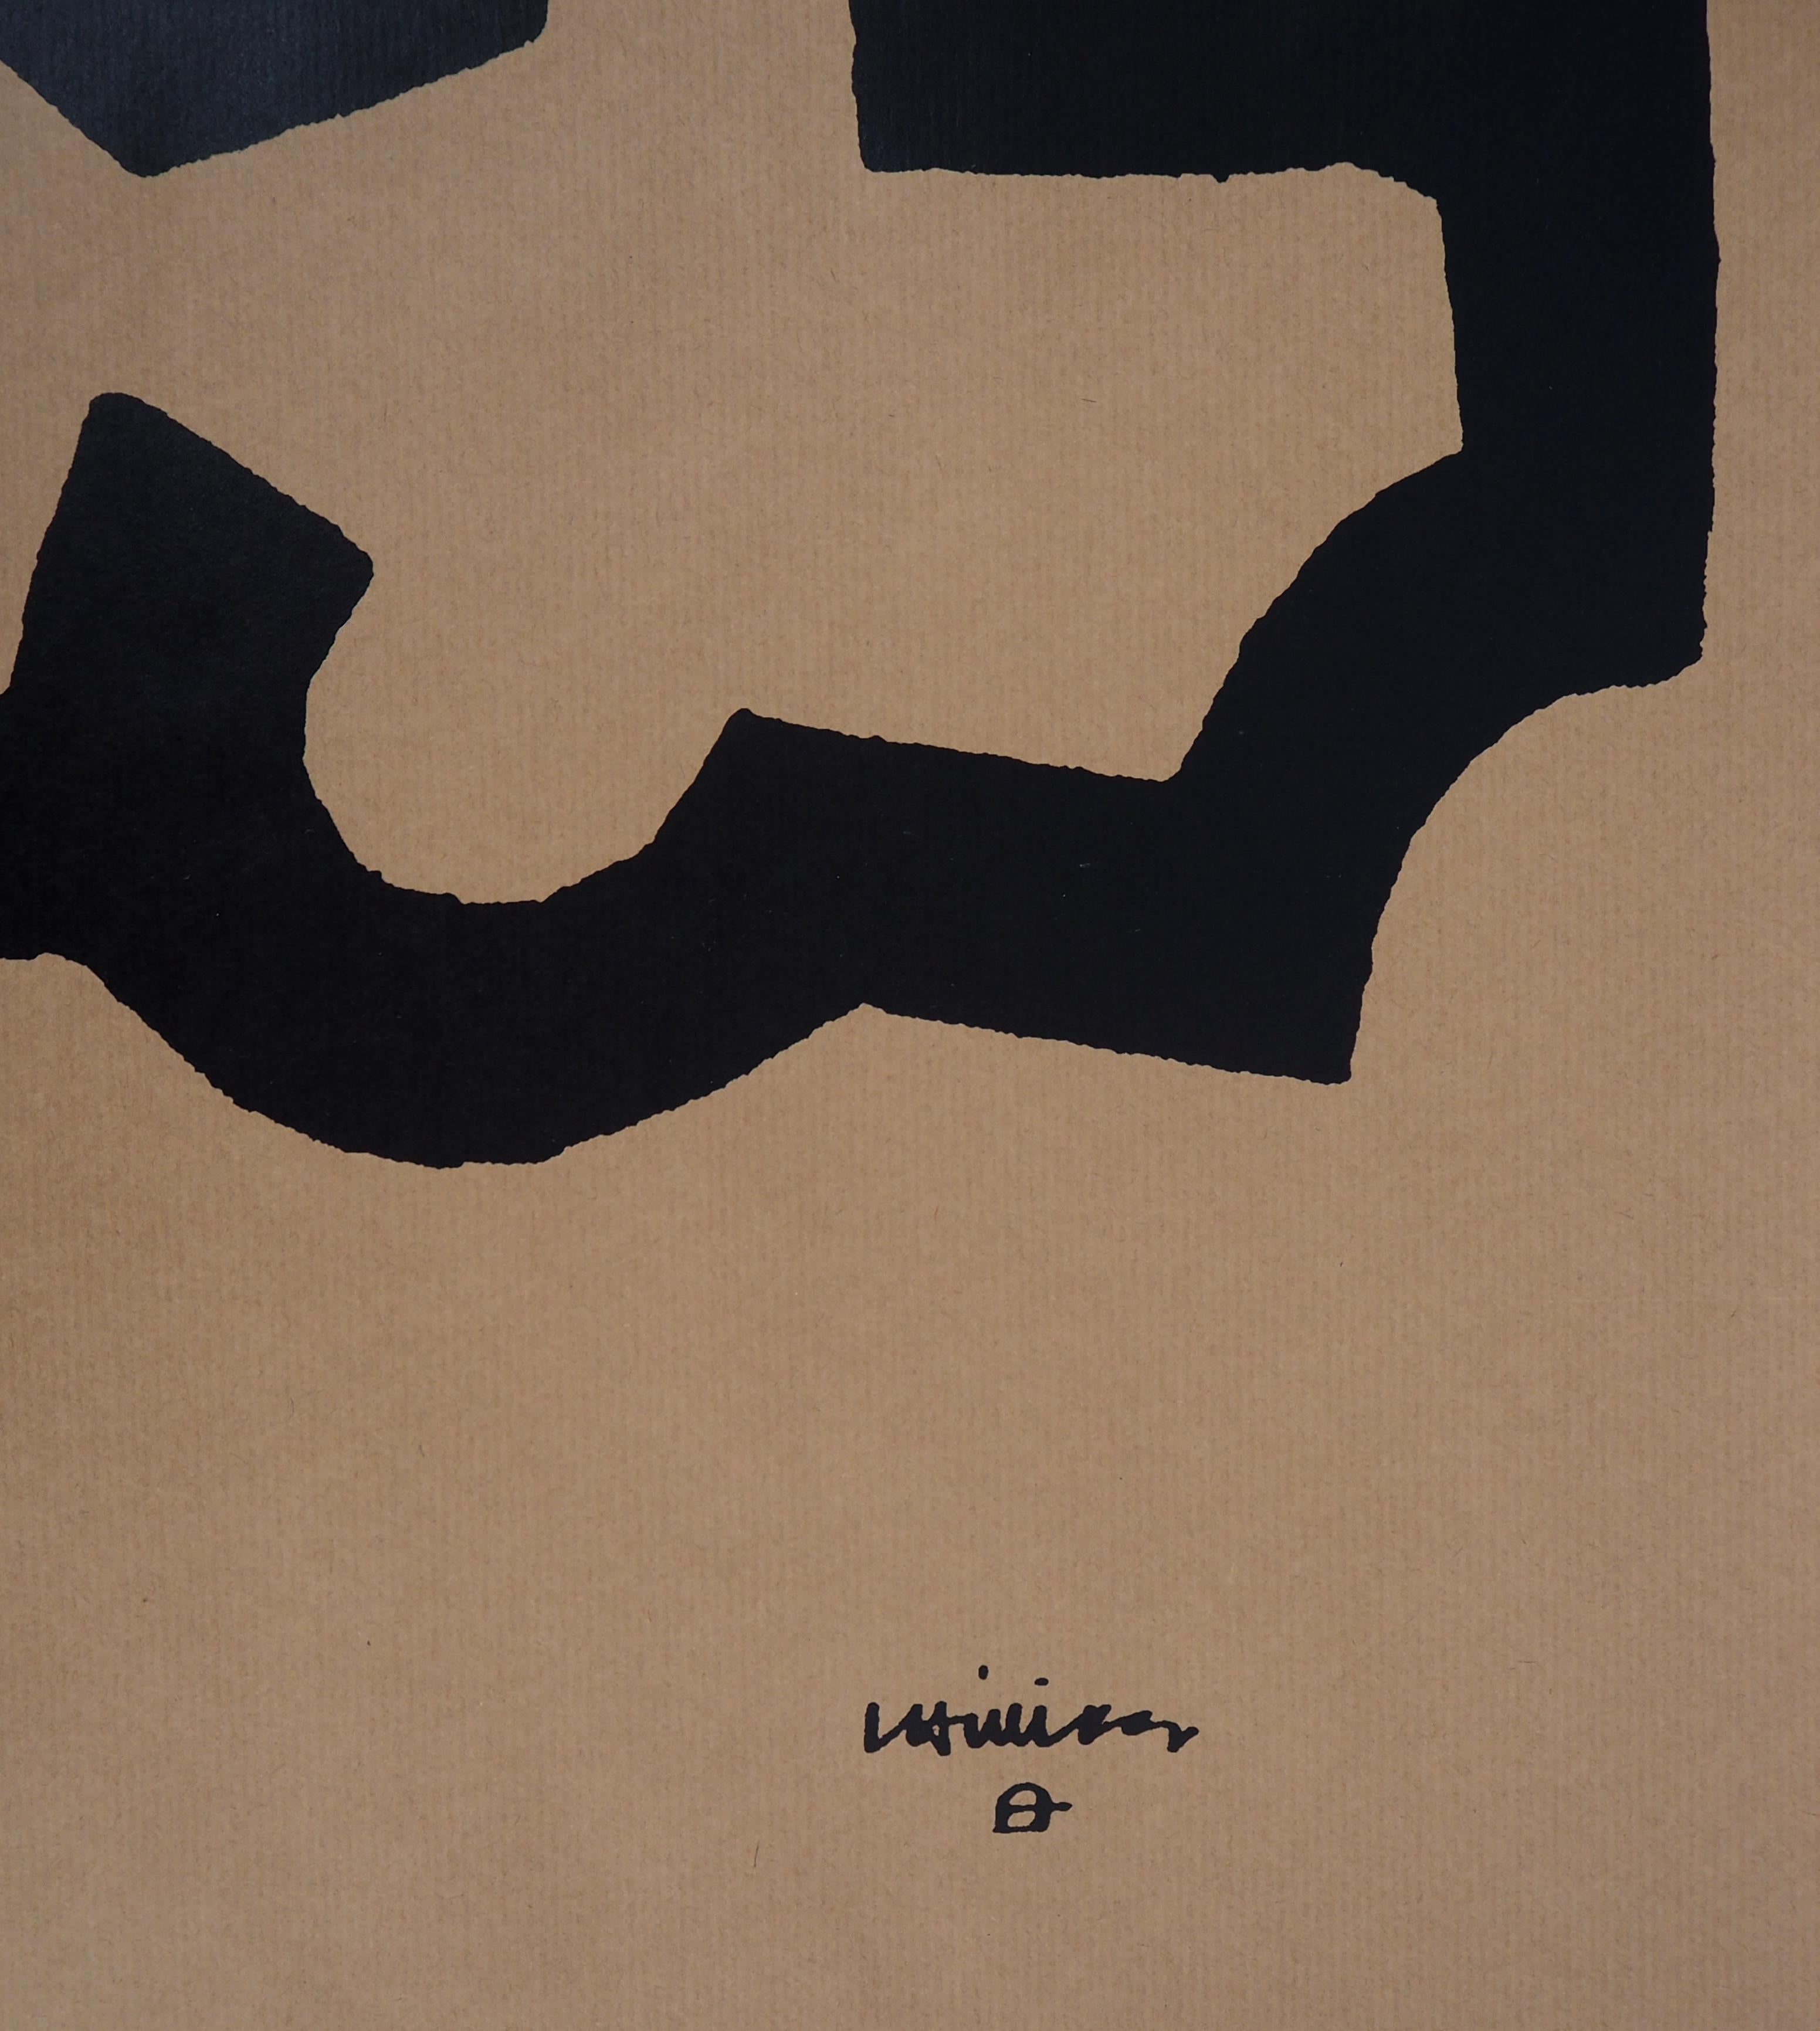 Abstraction in Black - Lithograph - Print by Eduardo Chillida